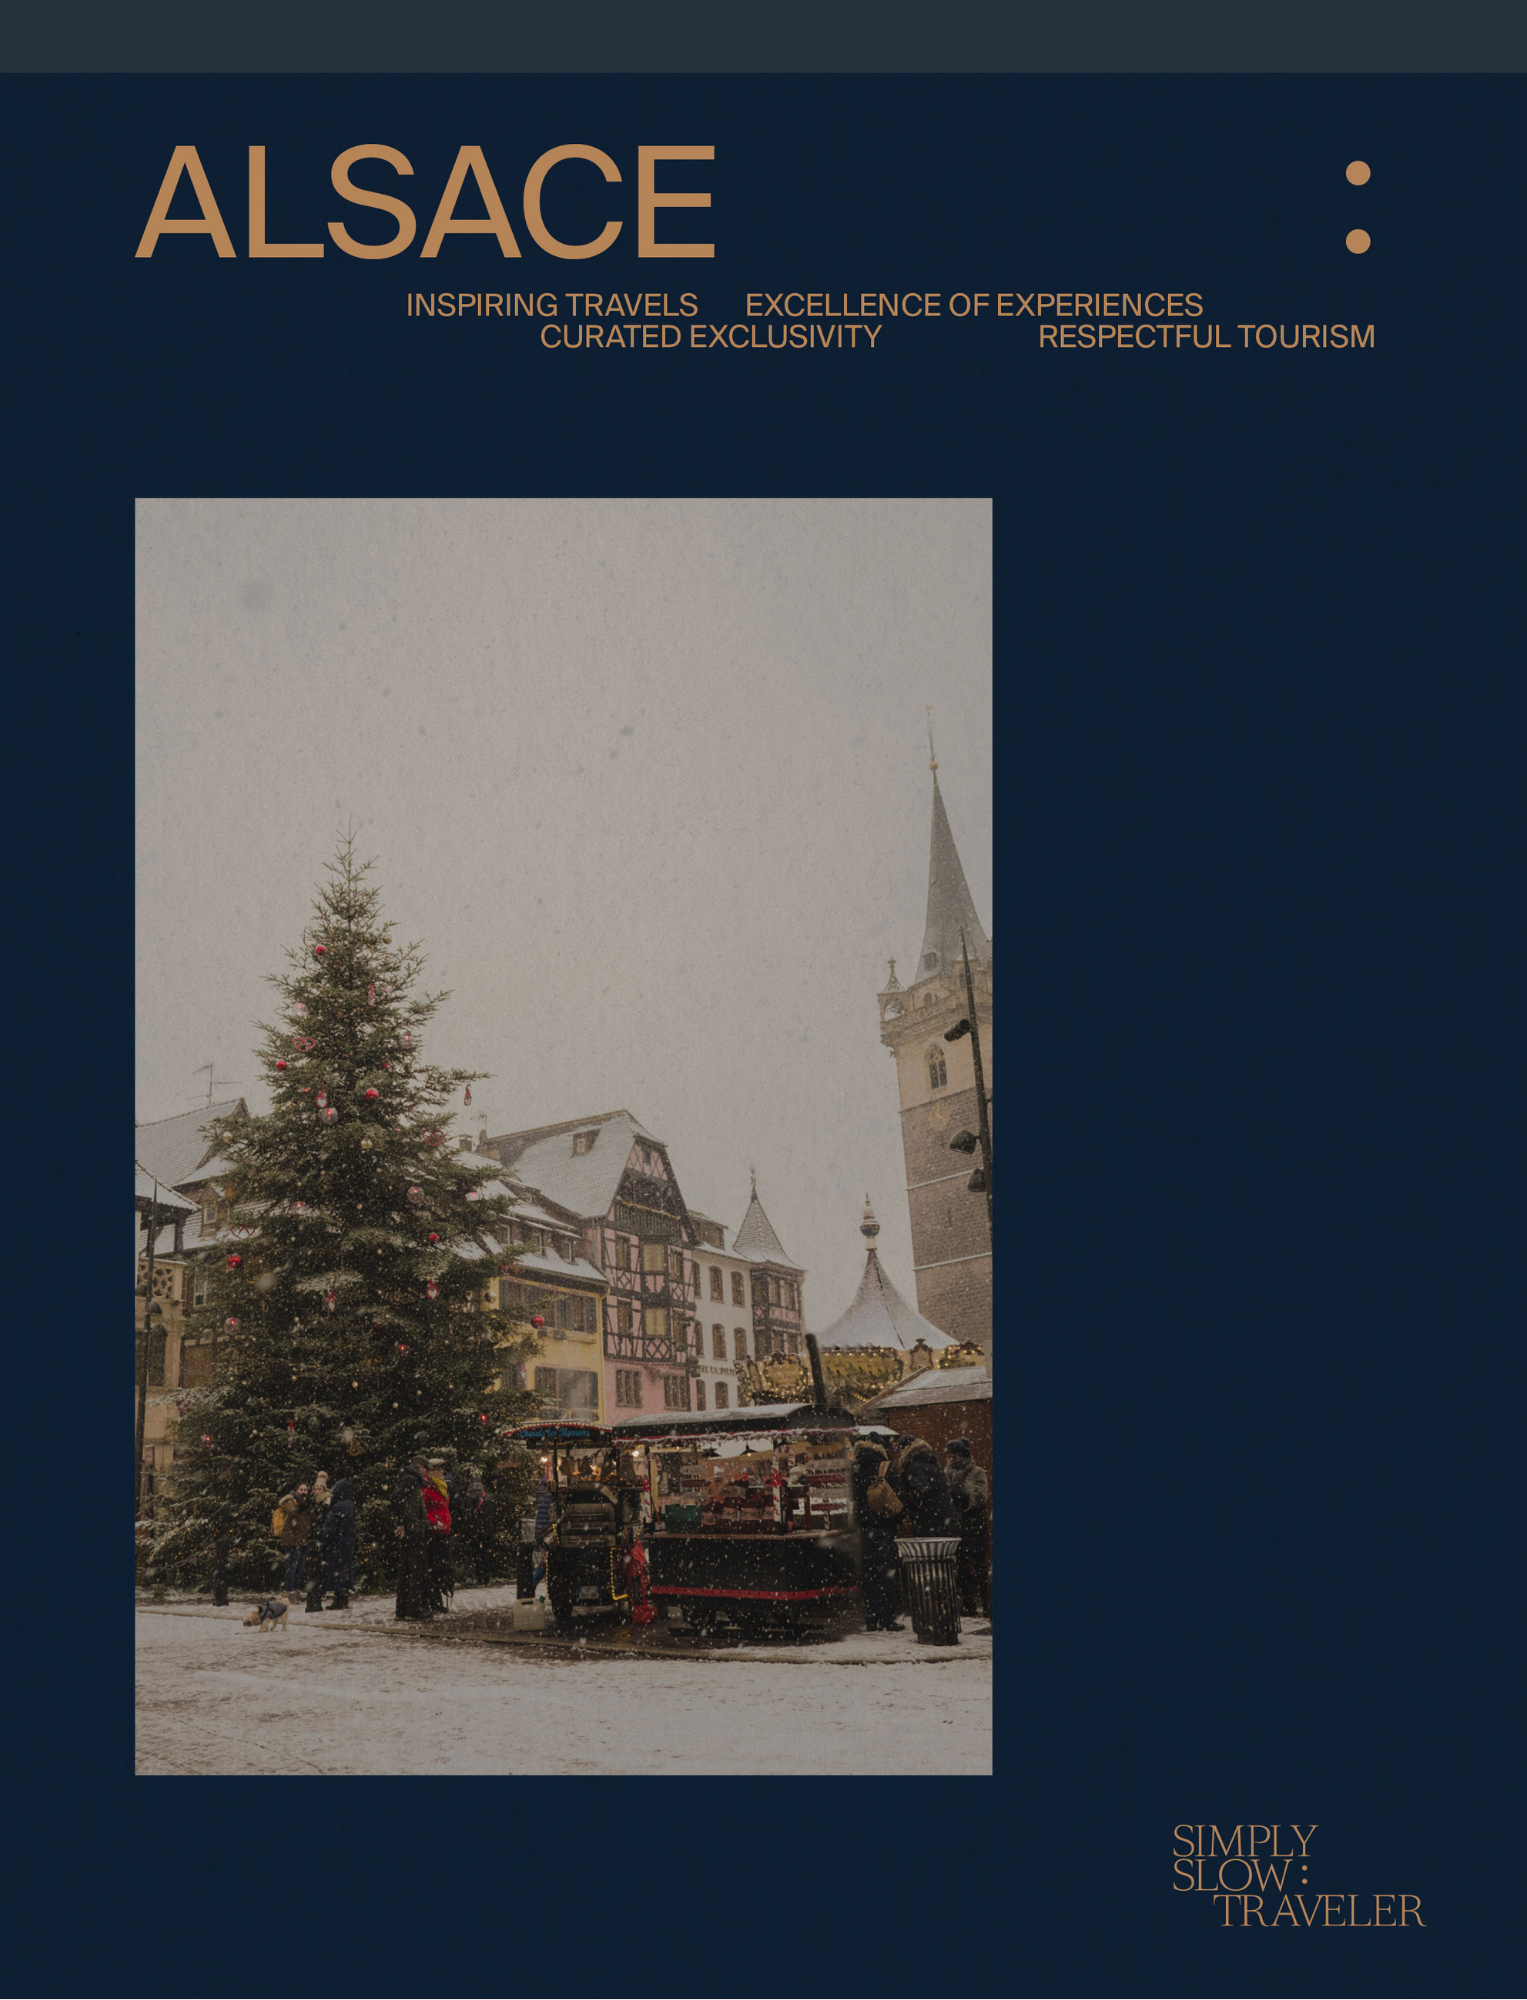 A Guide to Alsace, Christmas Edition - the cover page, by Simply Slow Traveler